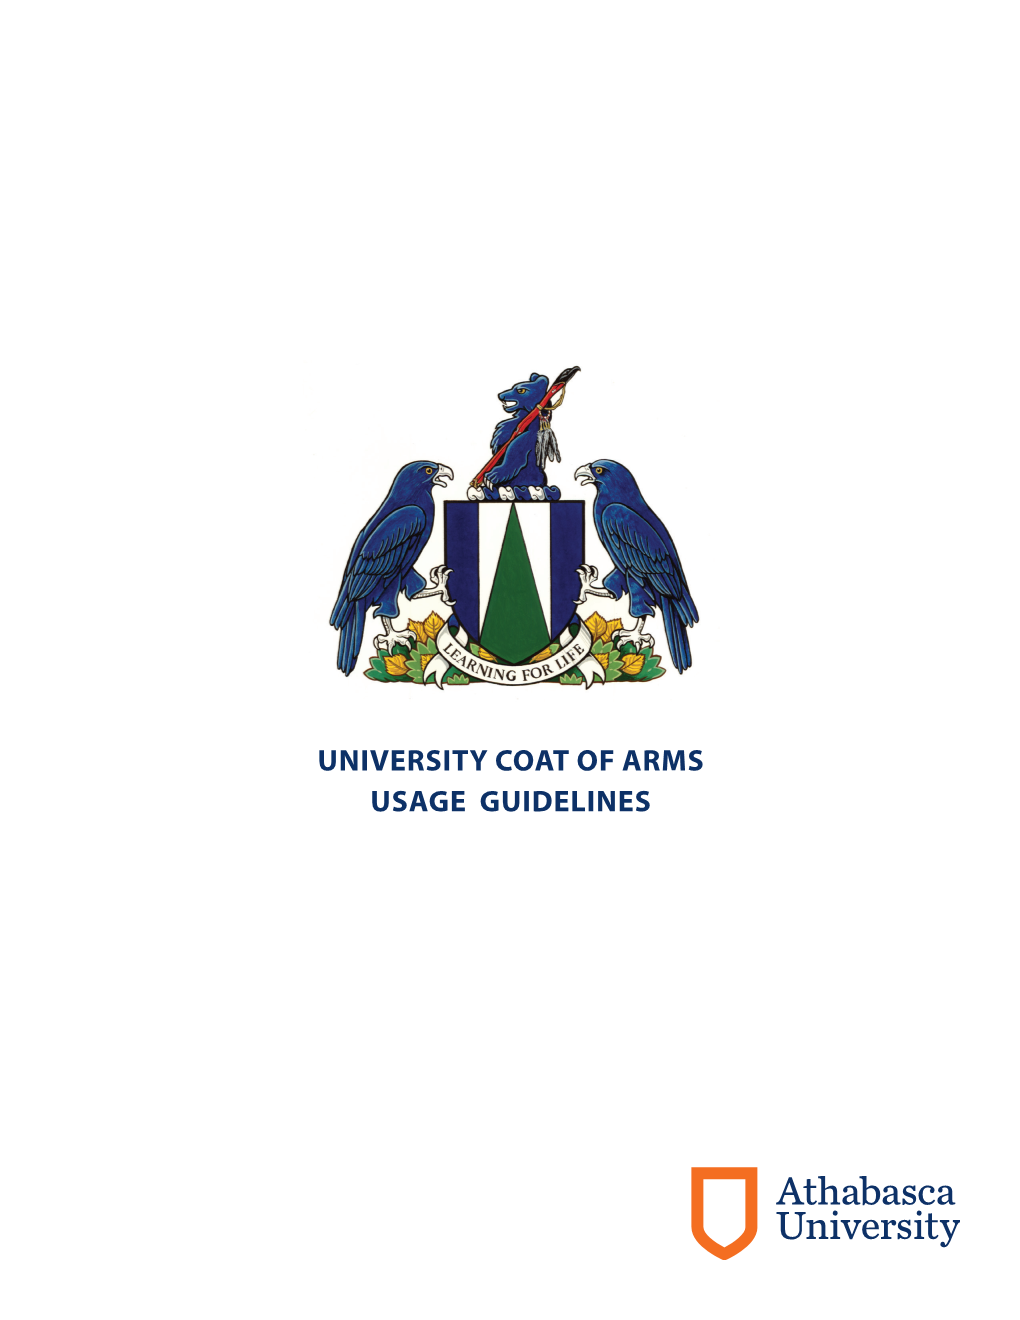 University Coat of Arms Usage Guidelines the Coat of Arms